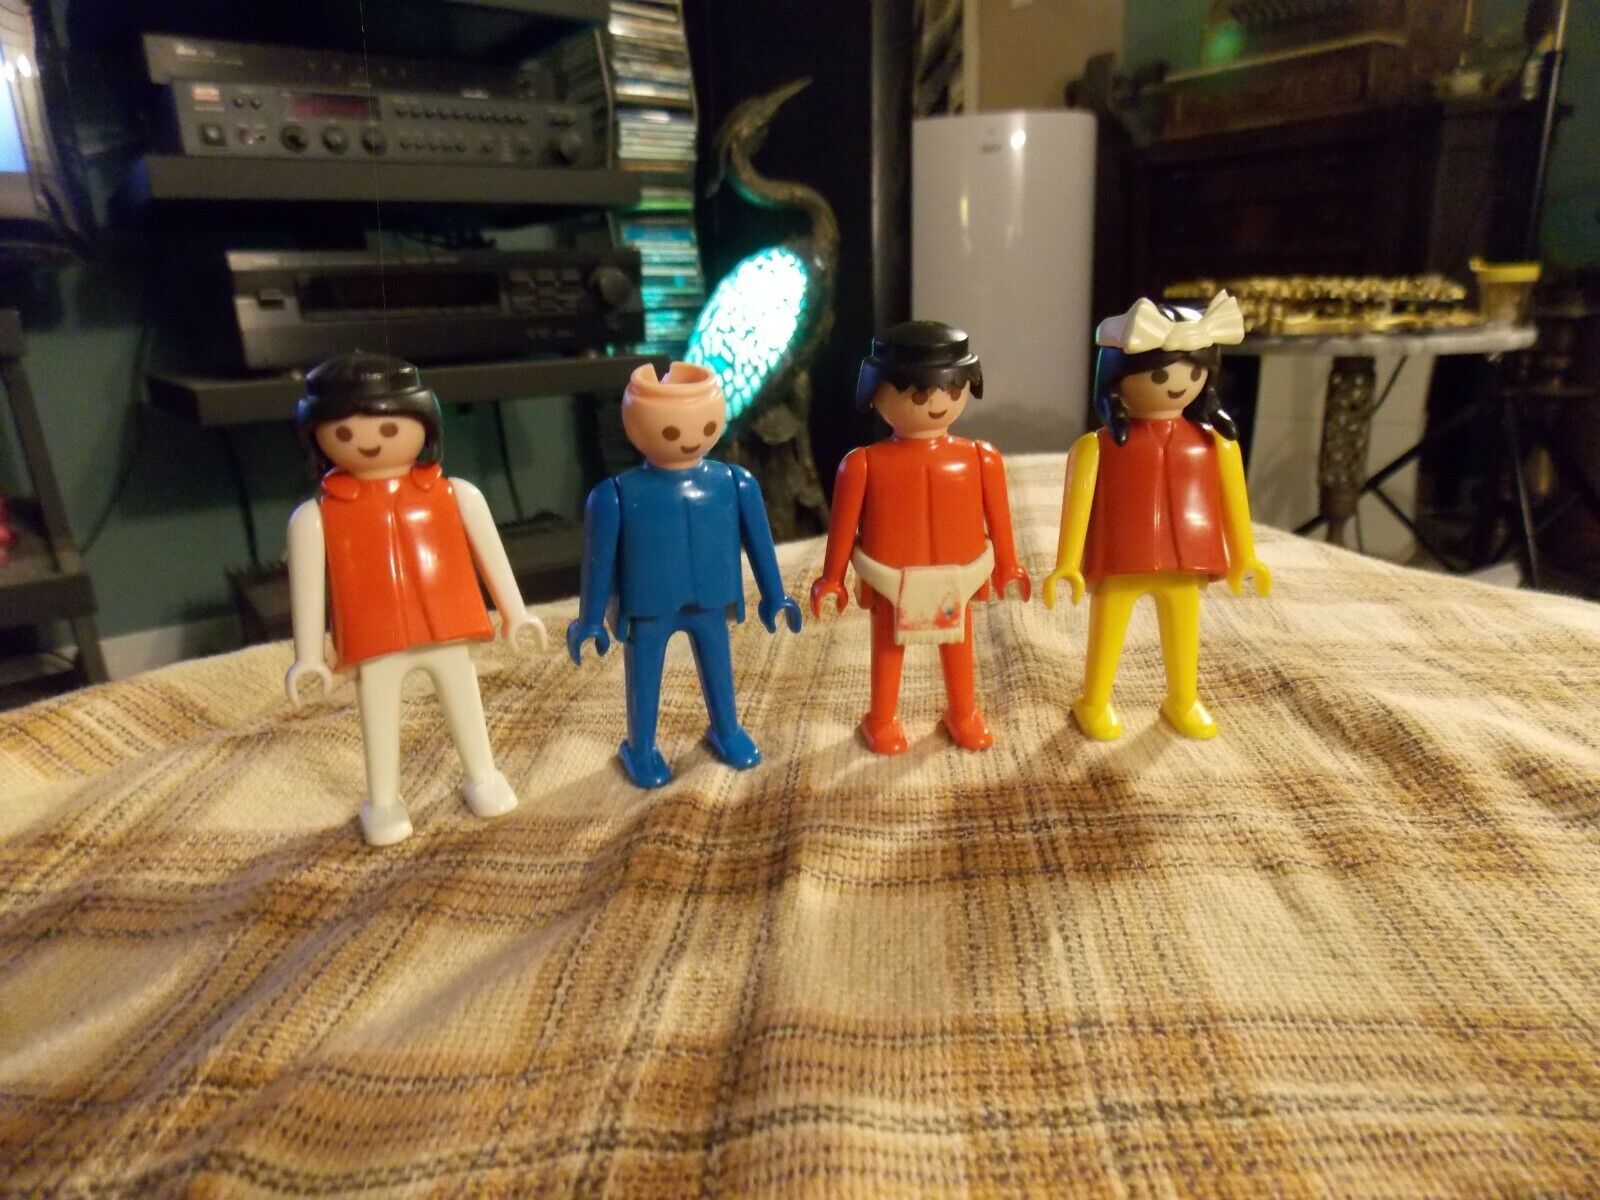 1974 Playmobil GEOBRA Misc Kids TOY Miniature CHARACTOR Parts Lot Of 4 Unique VG